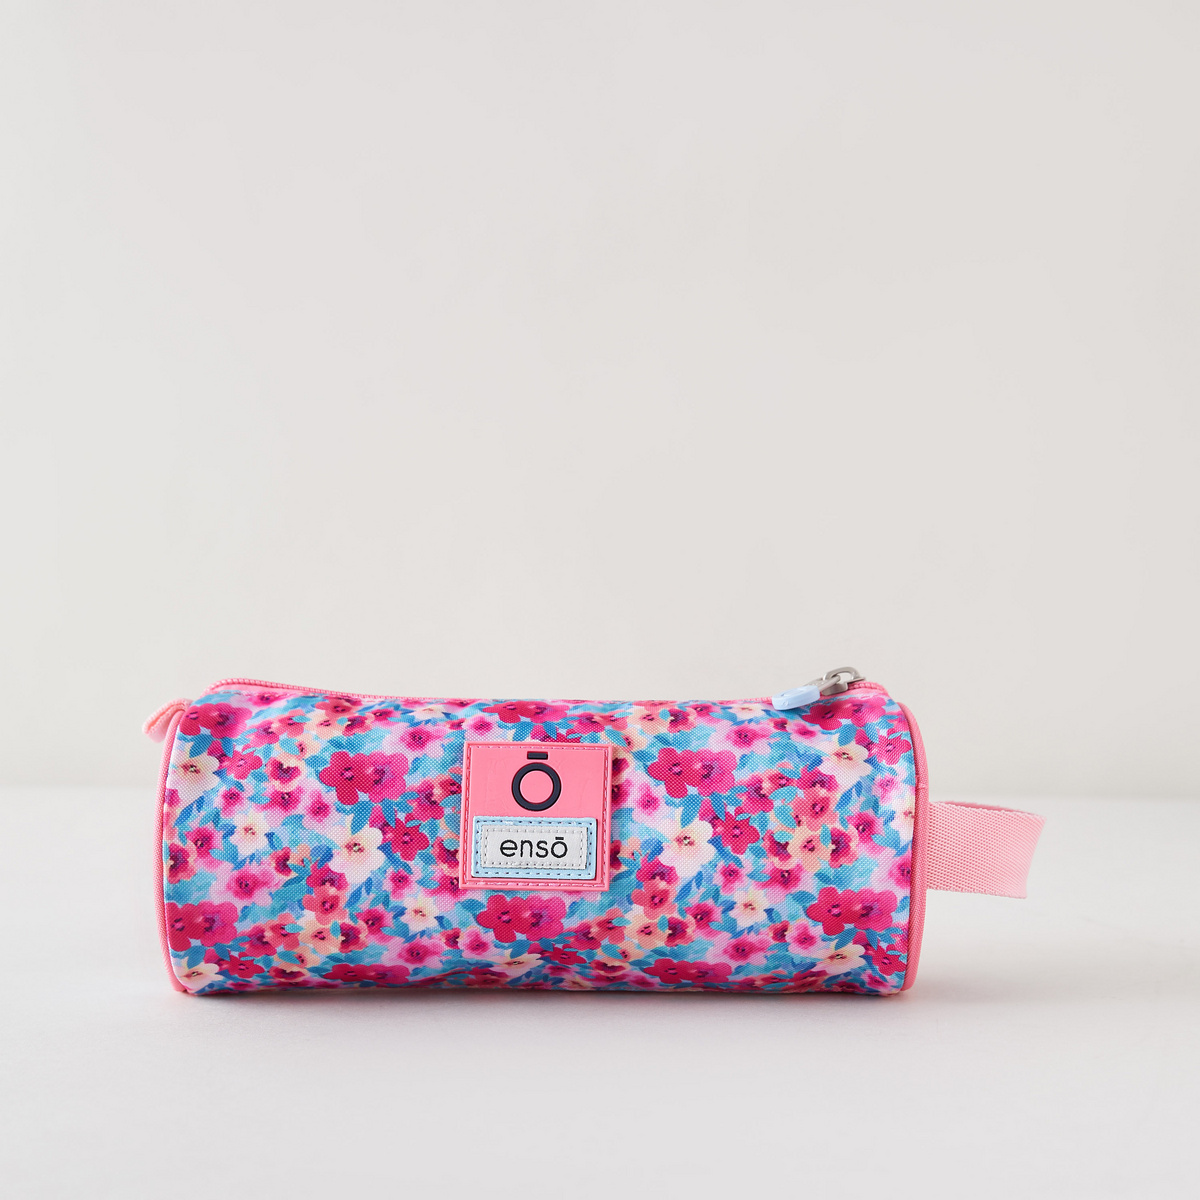 Enso Floral Print Pencil Case with Zip Closure